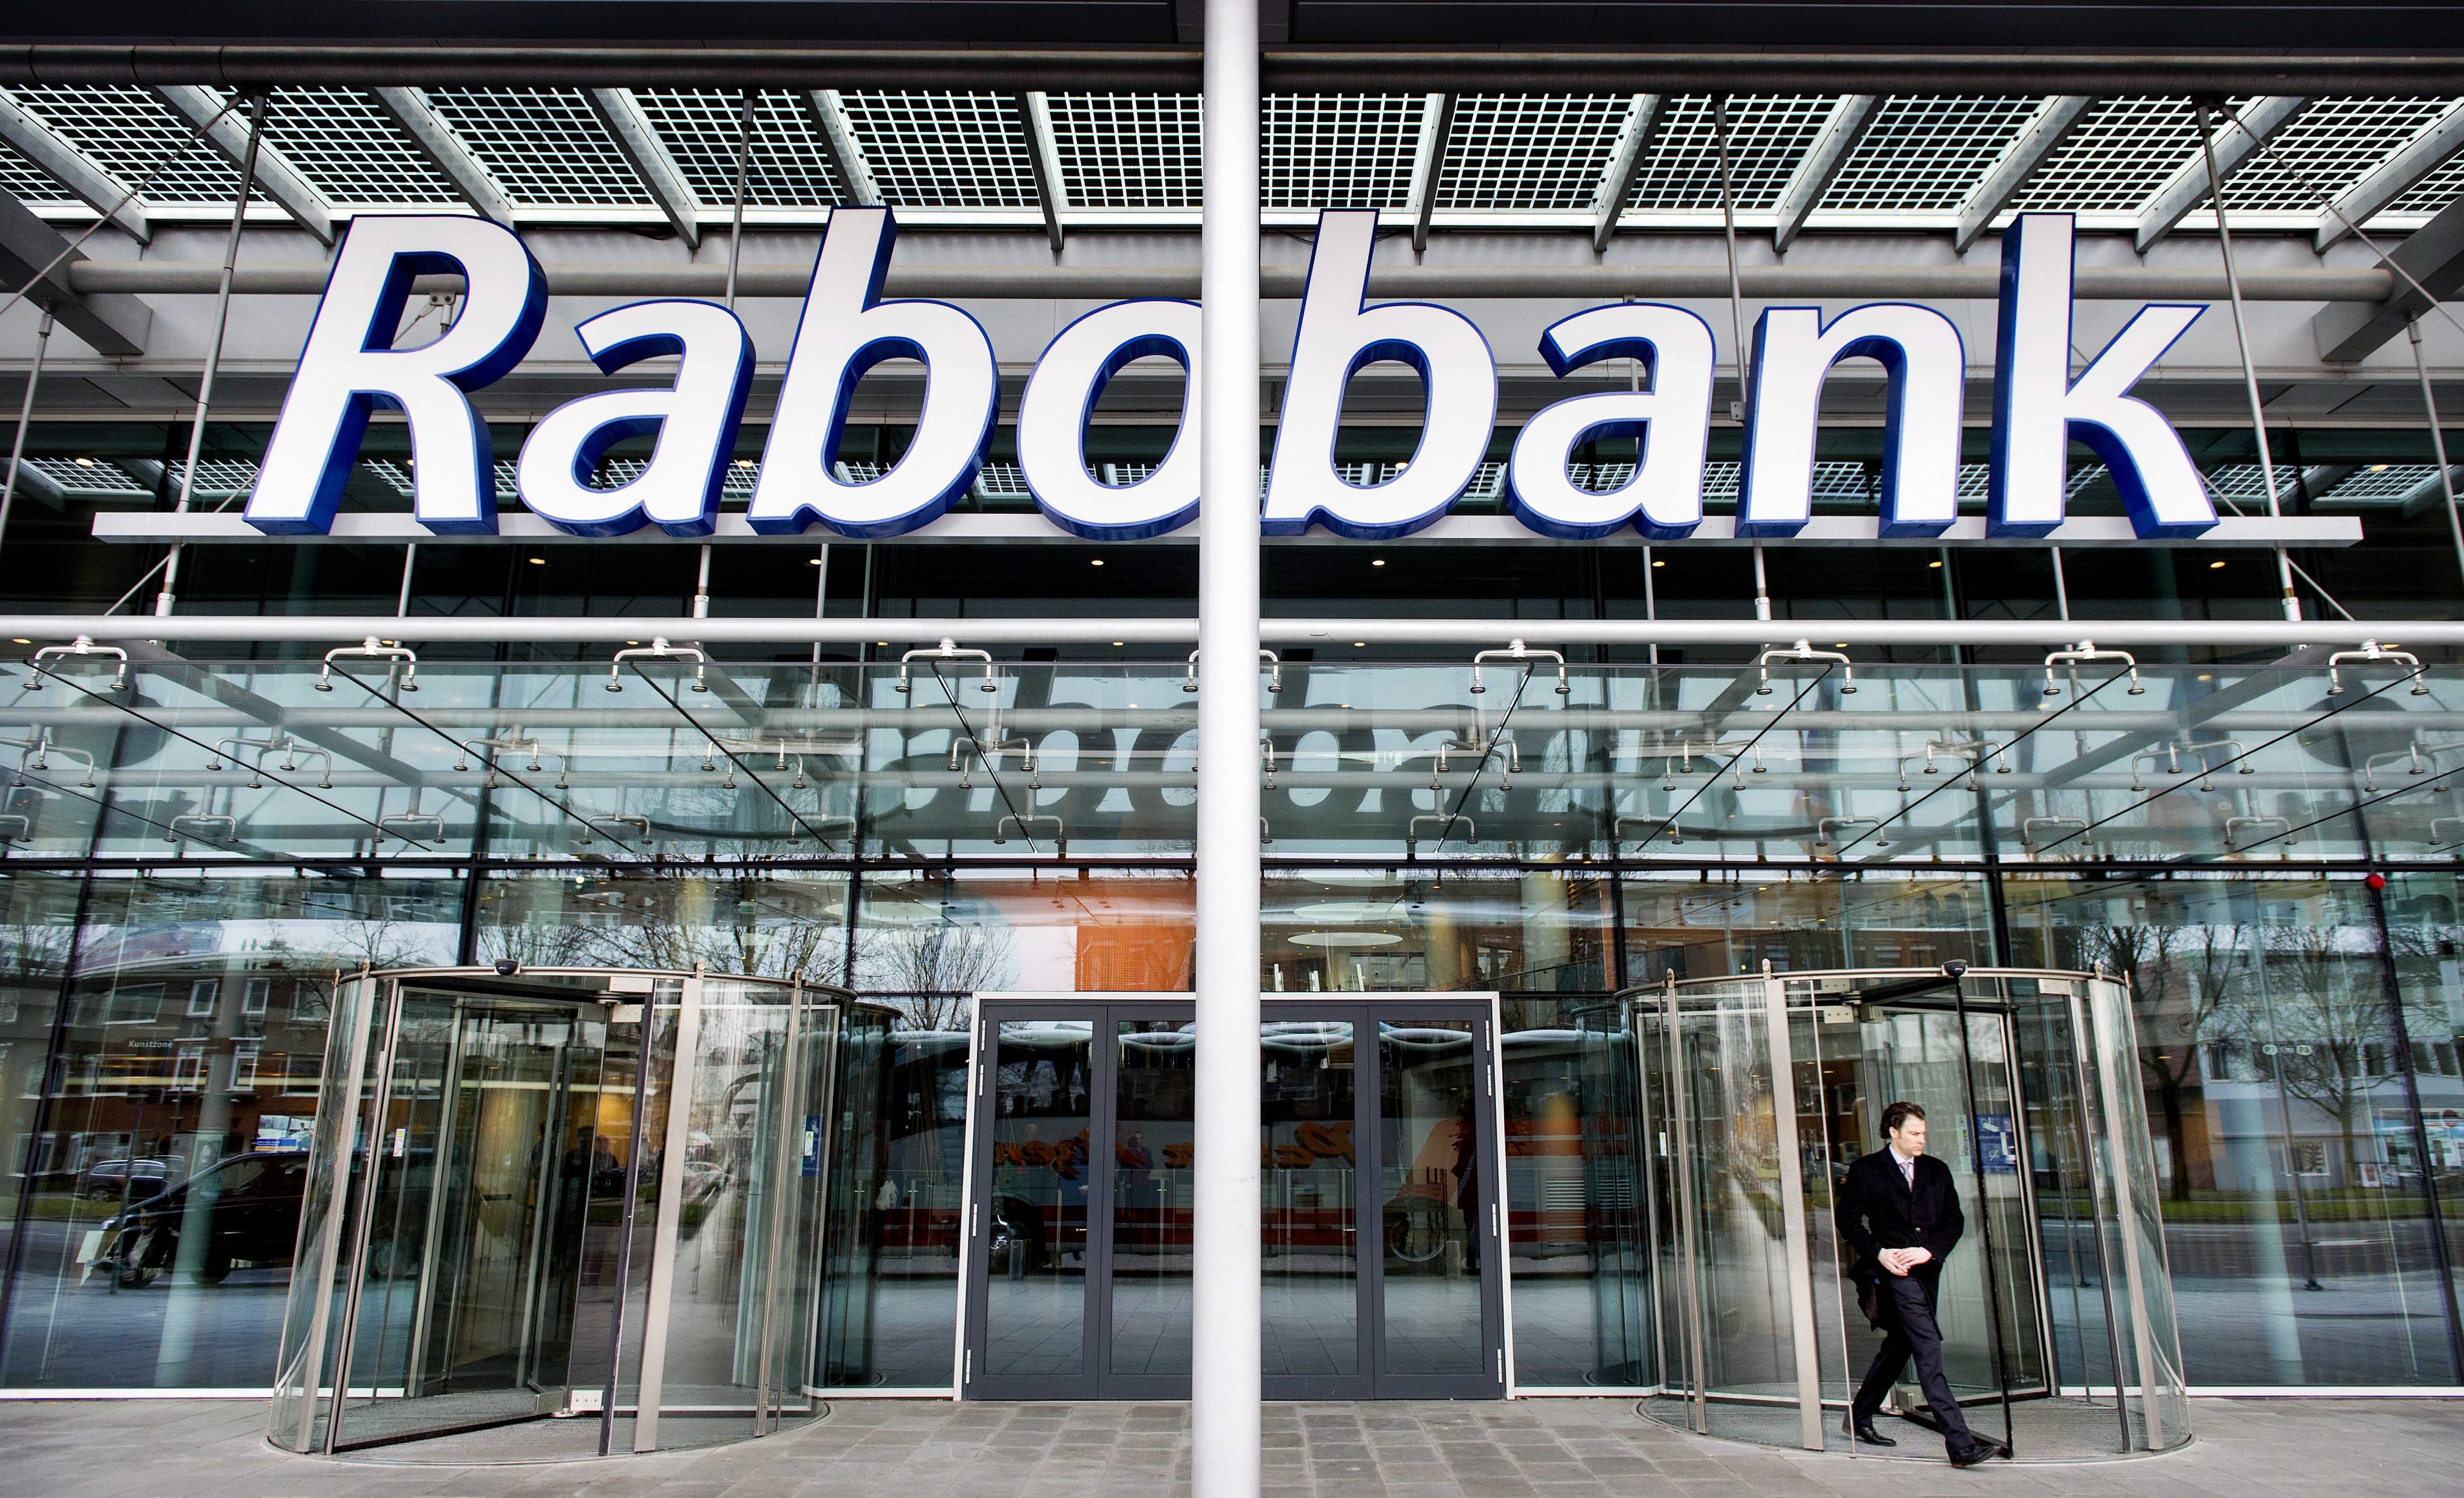 In October, Rabobank paid US$1 billion to resolve US and European probes into rate-rigging allegations. Photo: EPA